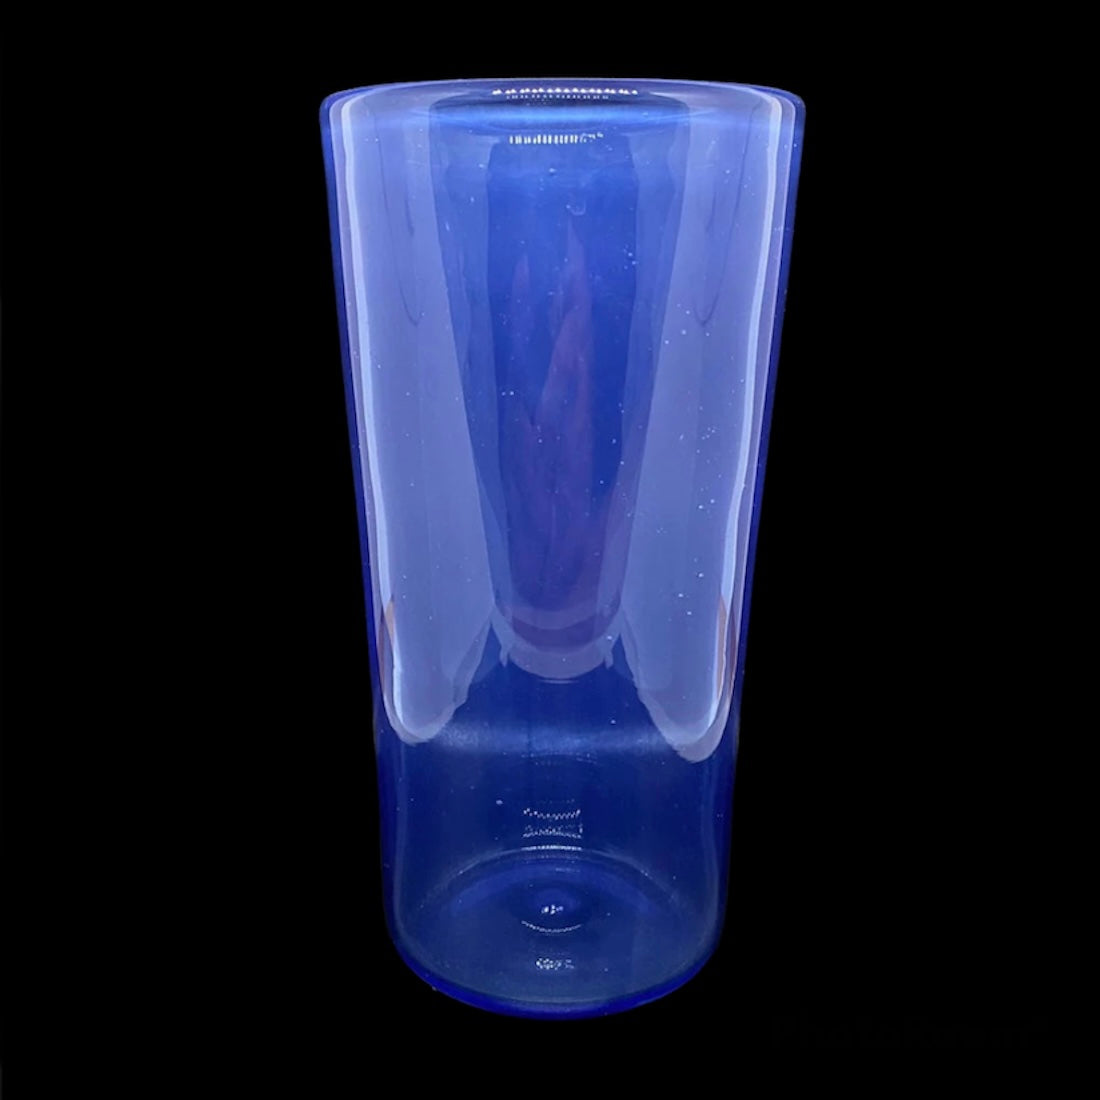 Glass Cups